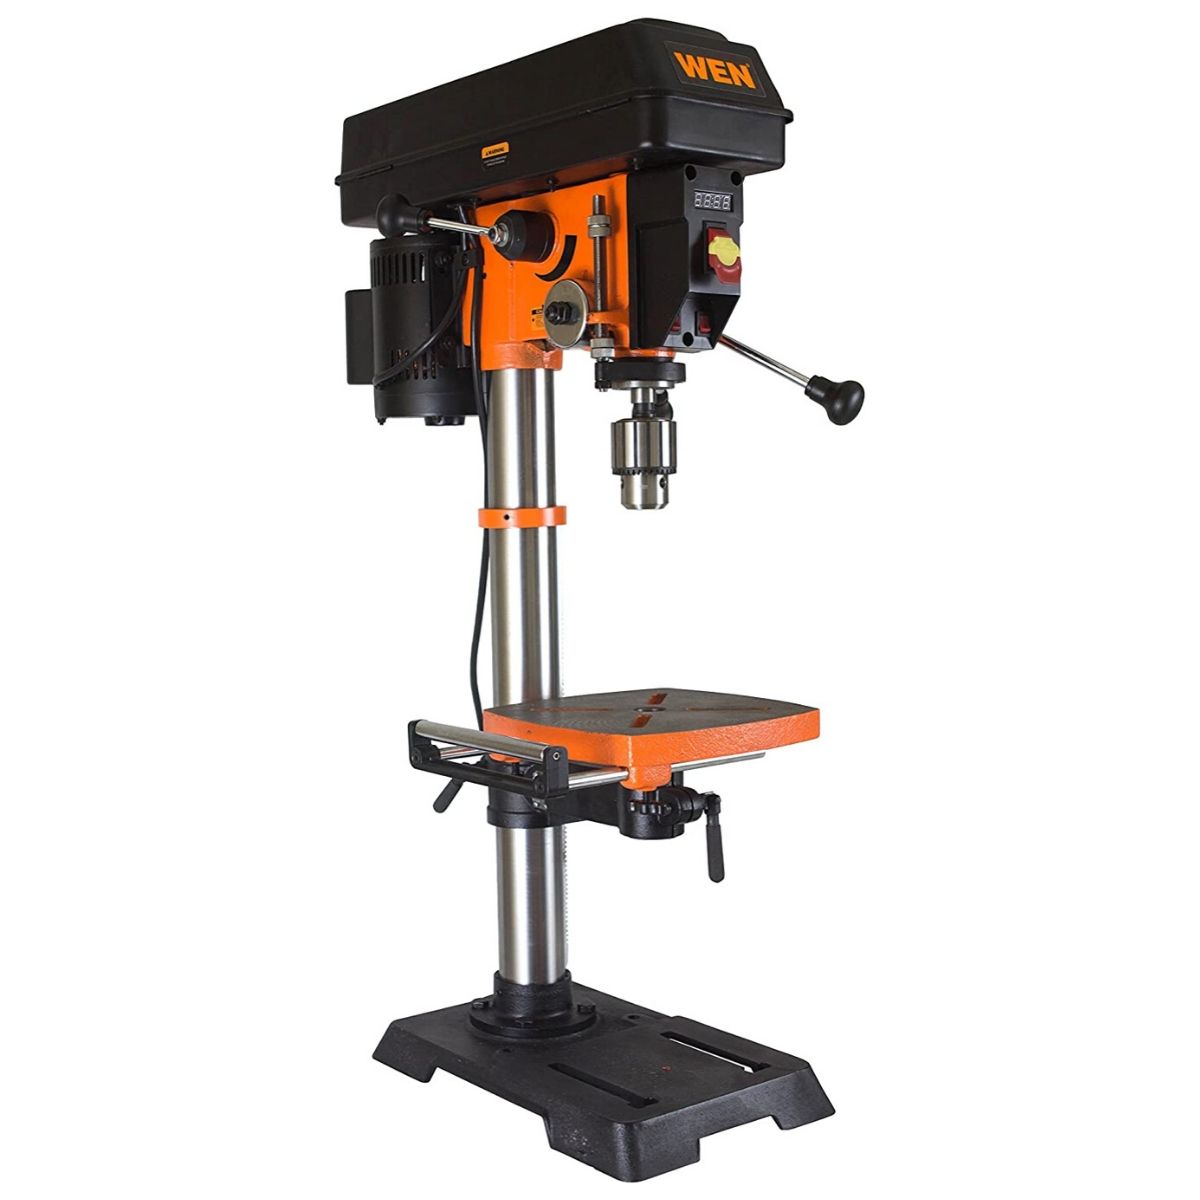 The Best Benchtop Drill Press for Your Workshop - Bob Vila